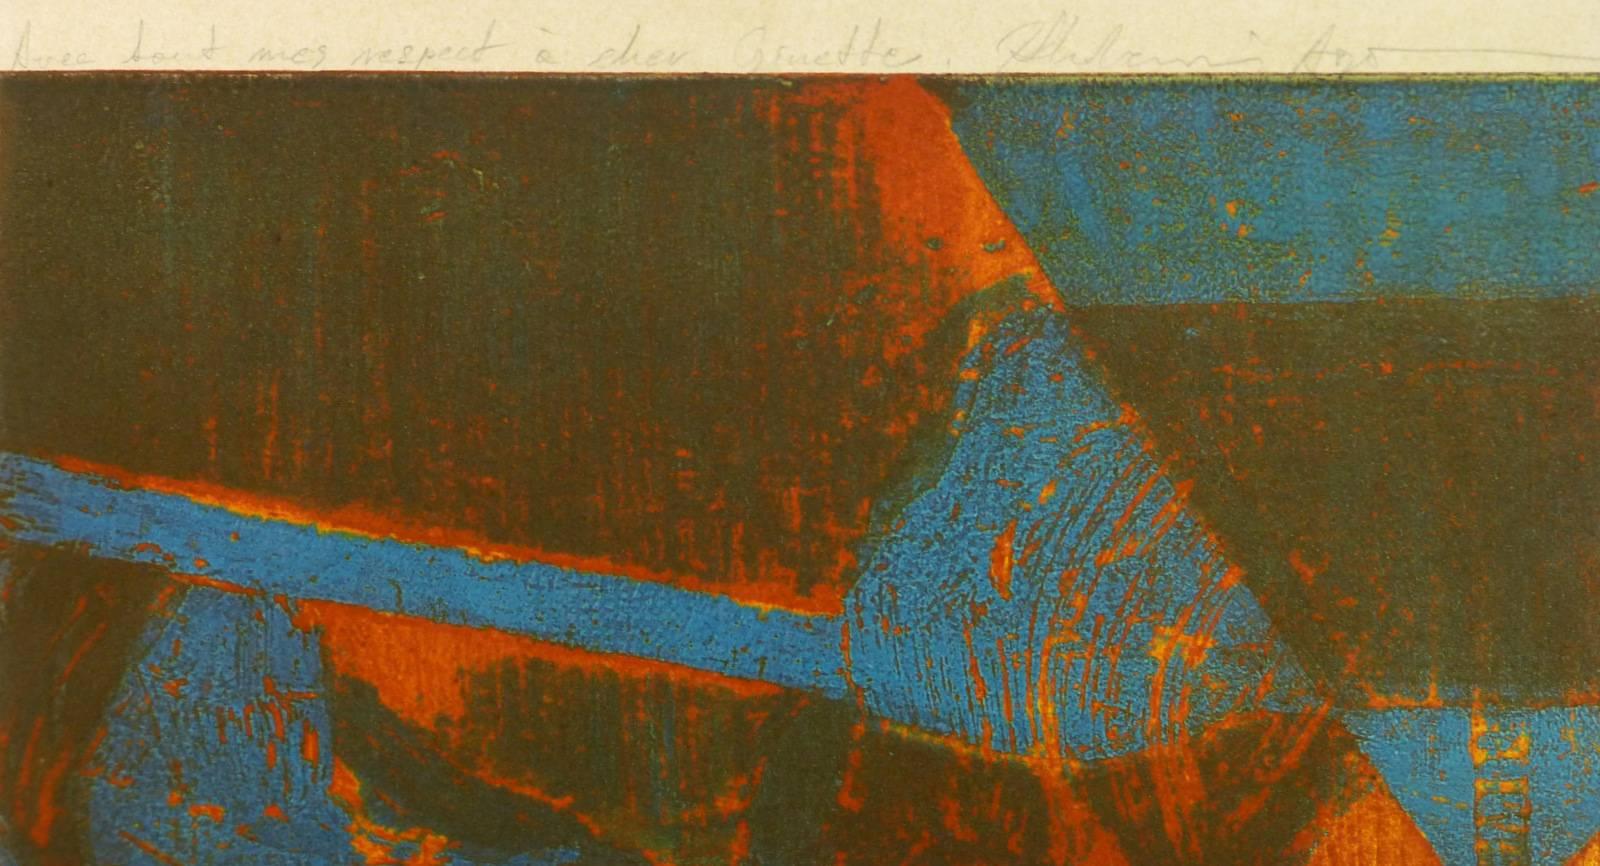 Abstract French etching in blues and reds, circa 1981. Signed lower right.  

Original artwork on paper displayed on a white mat with a gold border. Mat fits a standard-size frame.  Archival plastic sleeve and Certificate of Authenticity included.